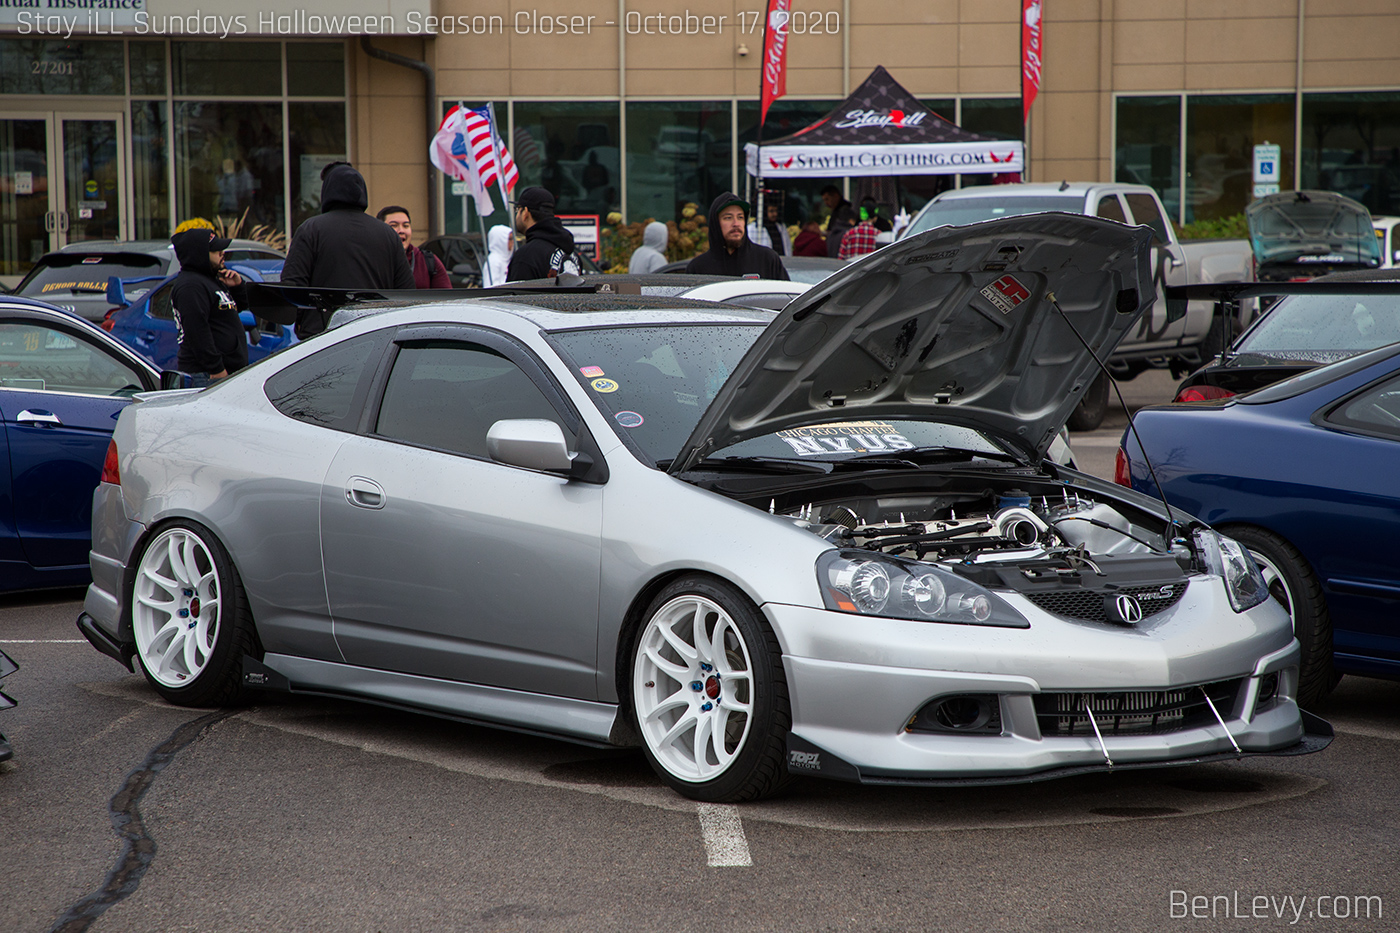 Silver Acura RSX Type-S